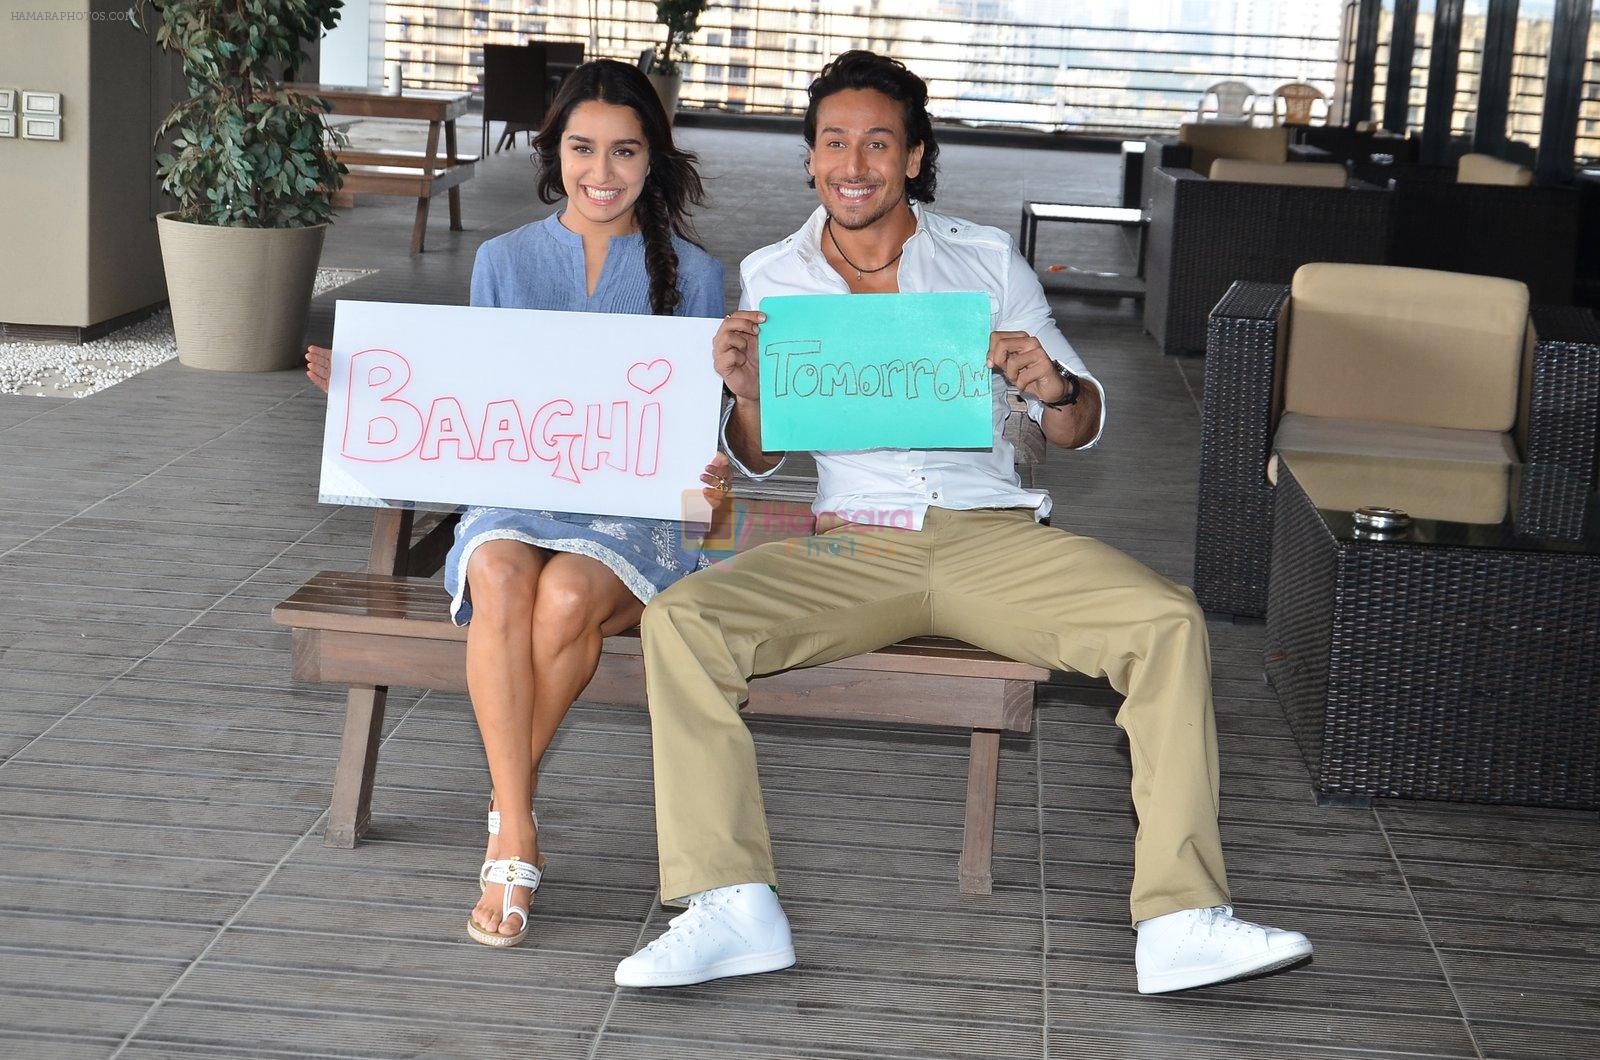 Shraddha Kapoor and Tiger Shroff photo shoot for Baaghi promotions